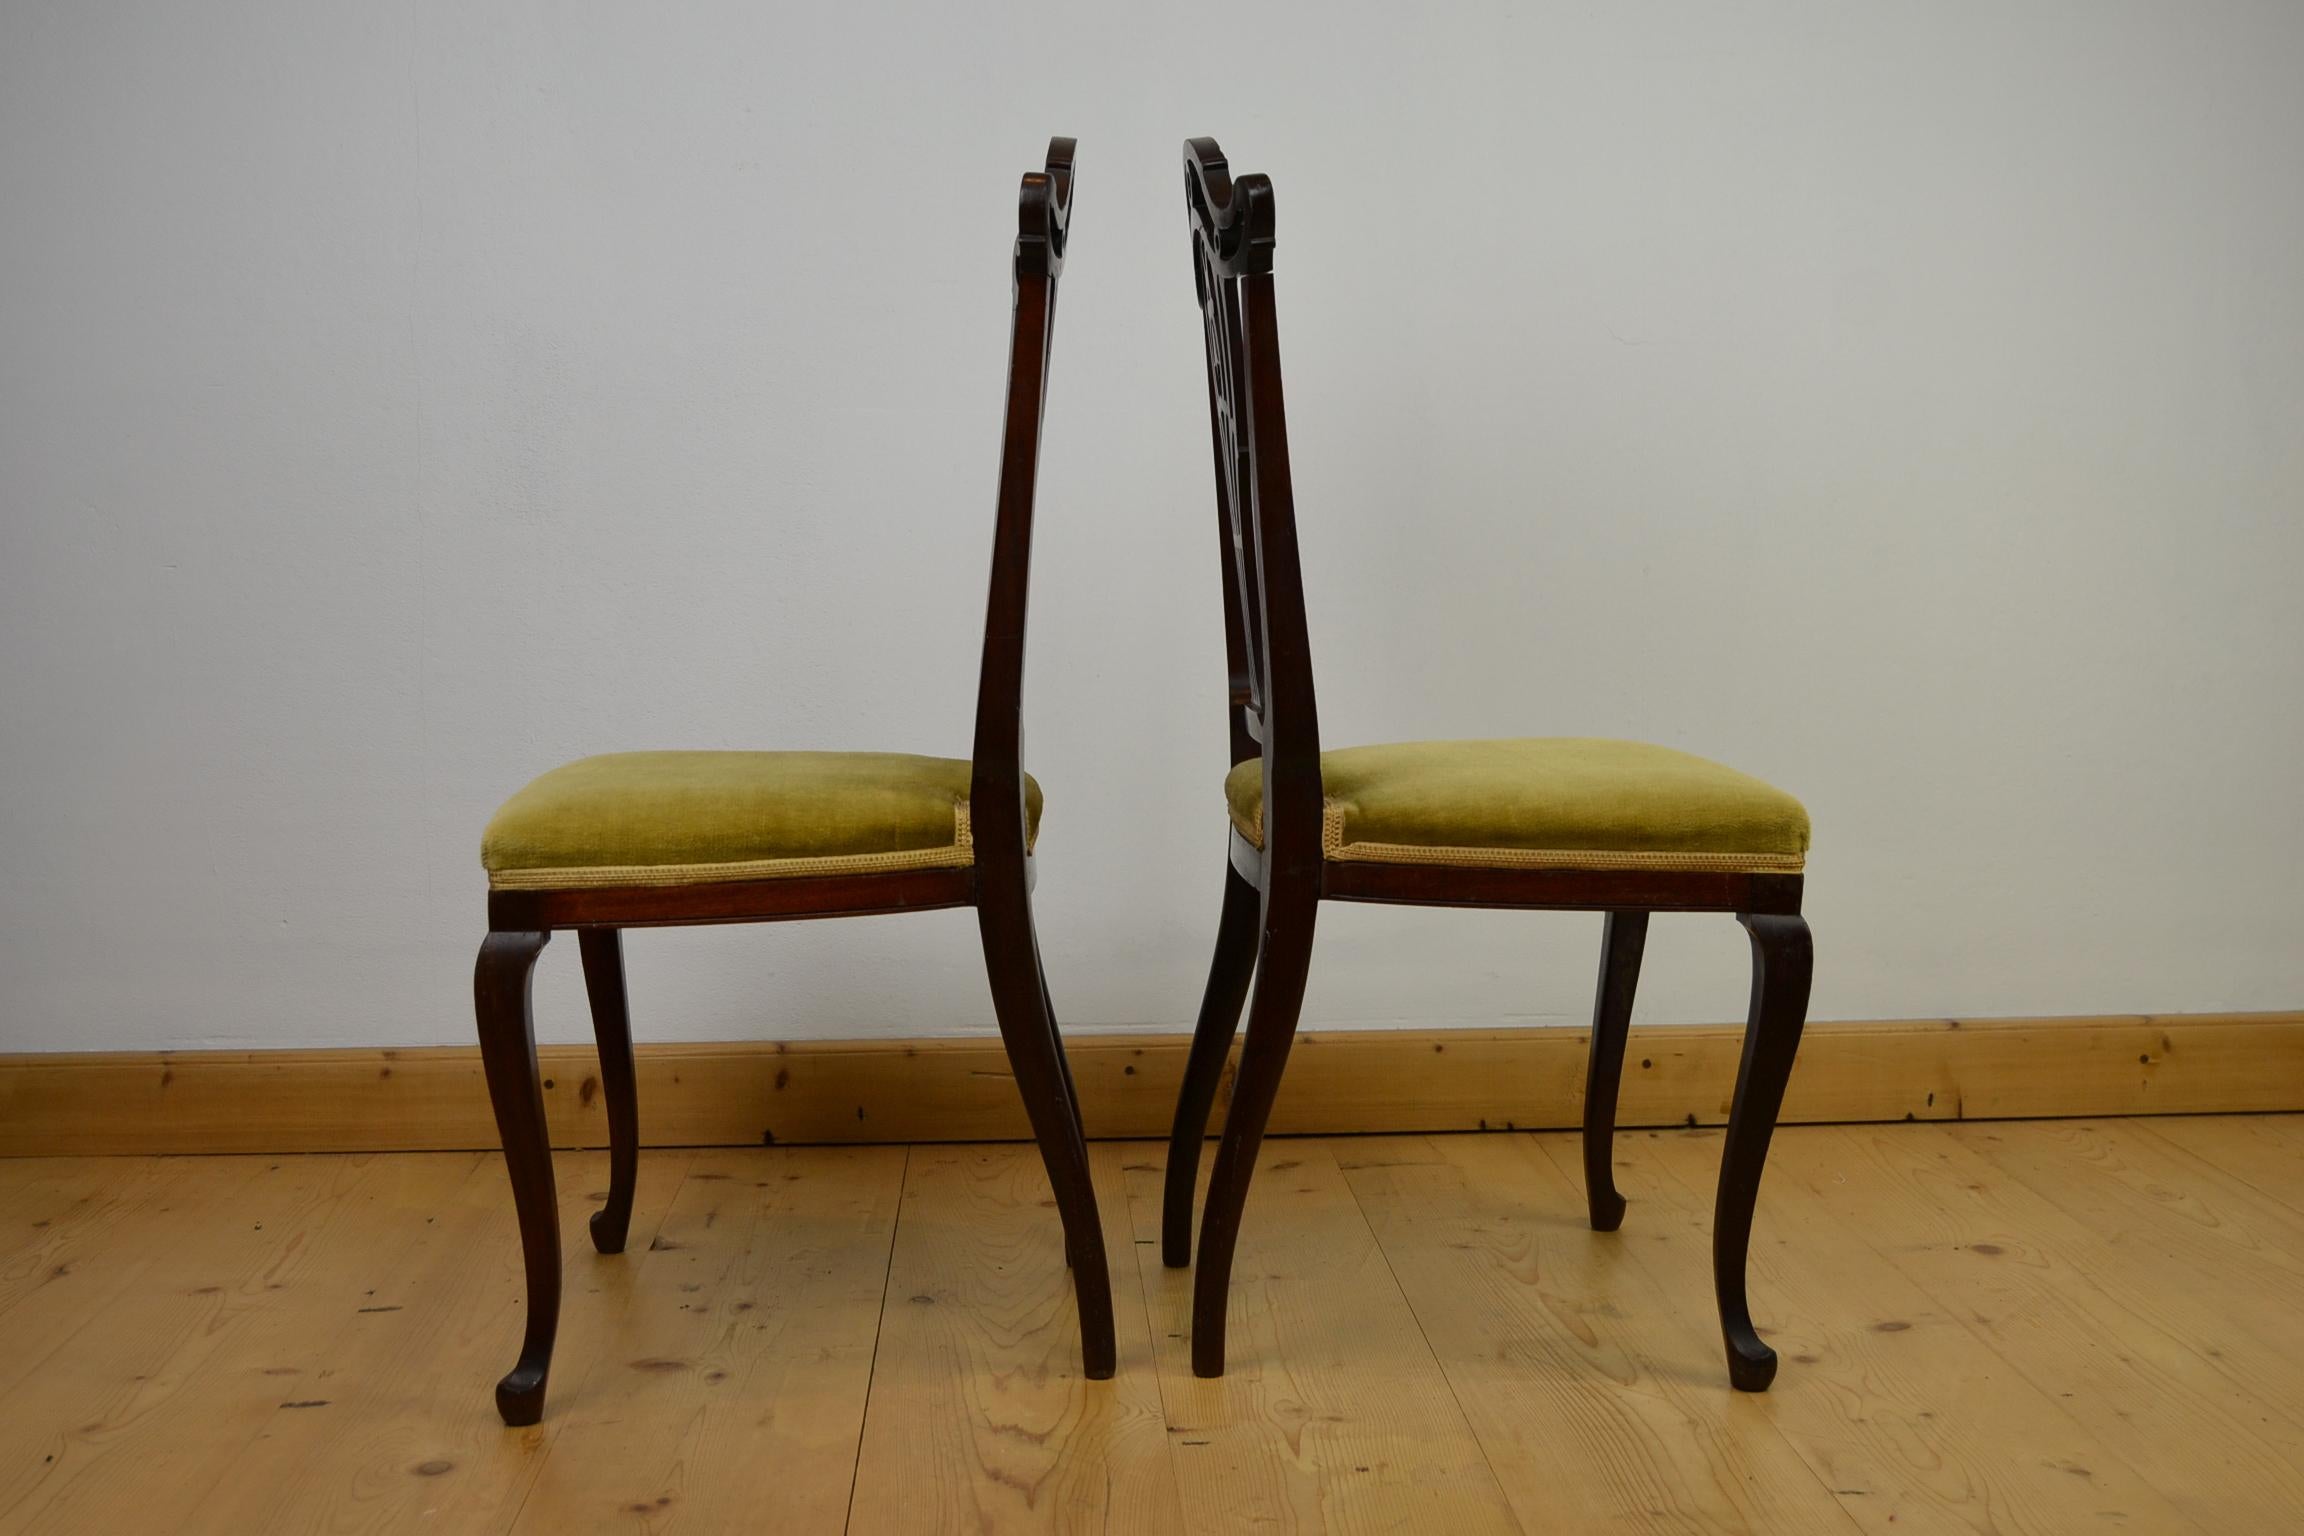 Hollandia Pander & Zn Pair of Side Chairs, Late 19th Century For Sale 7